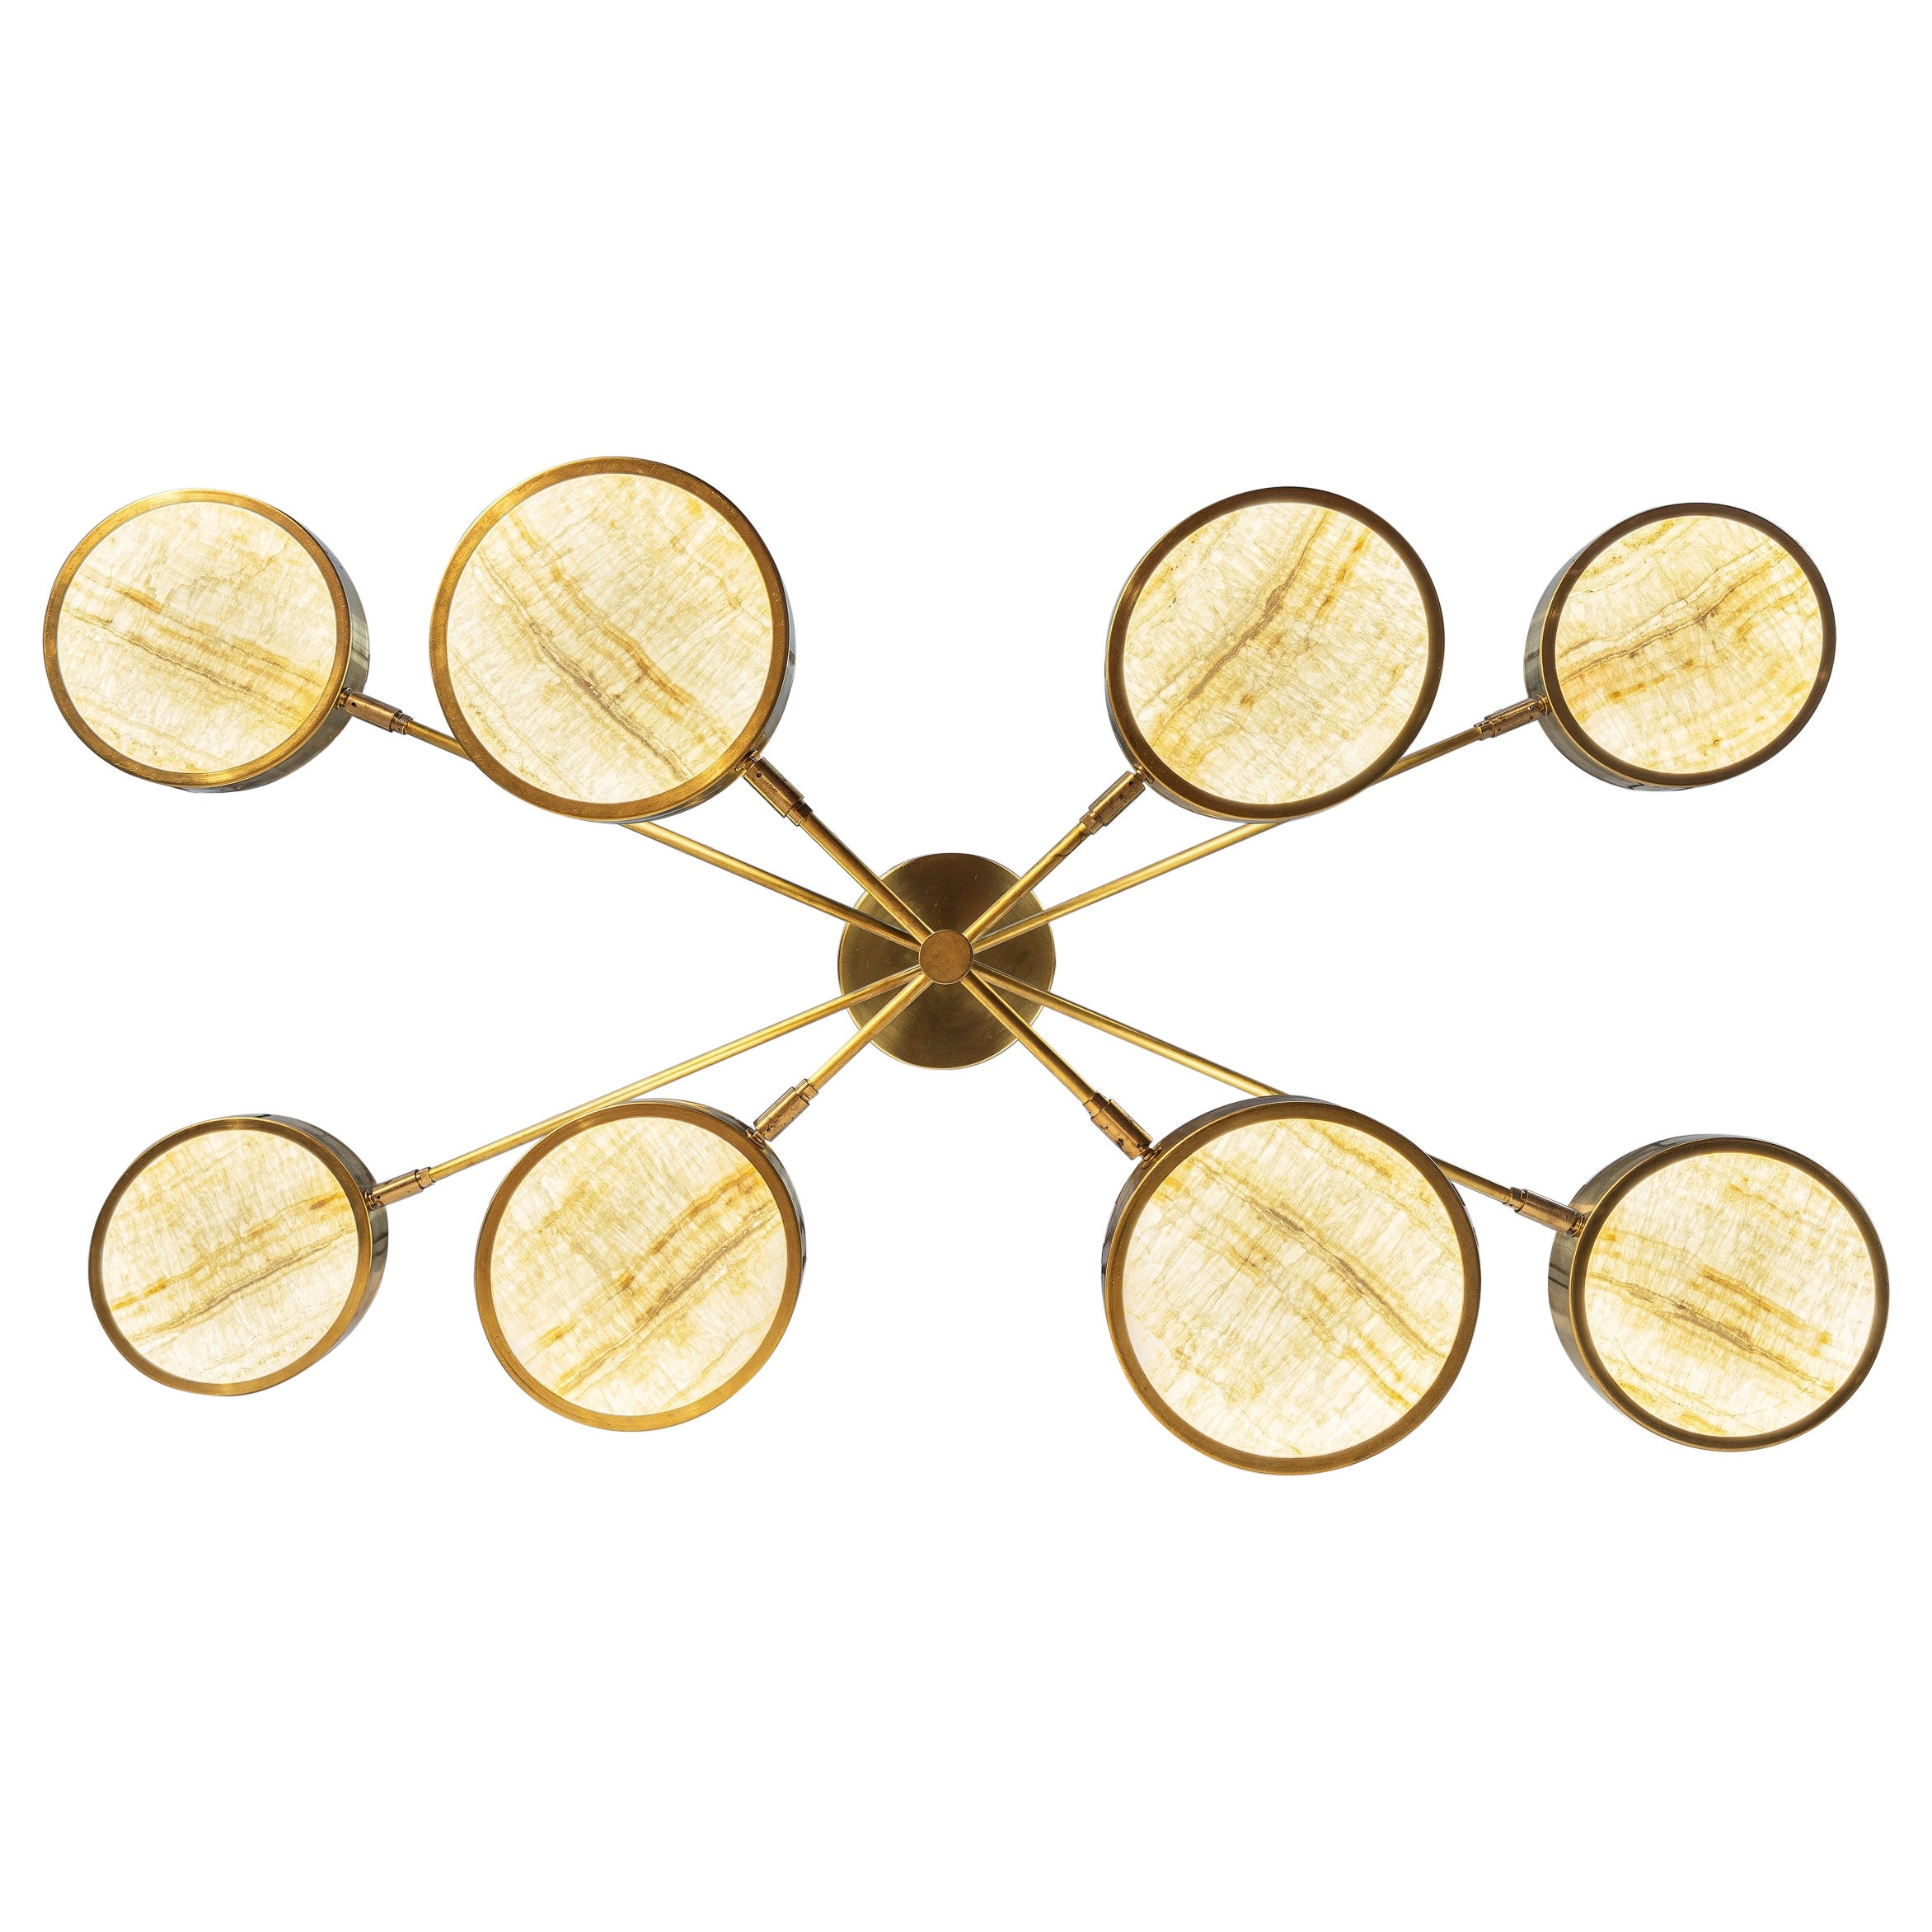 Mid-Century Modern Sistema Solare Chandelier, Piattelli Design, Ivory-Toned Onyx and Brass, 8-Shade For Sale